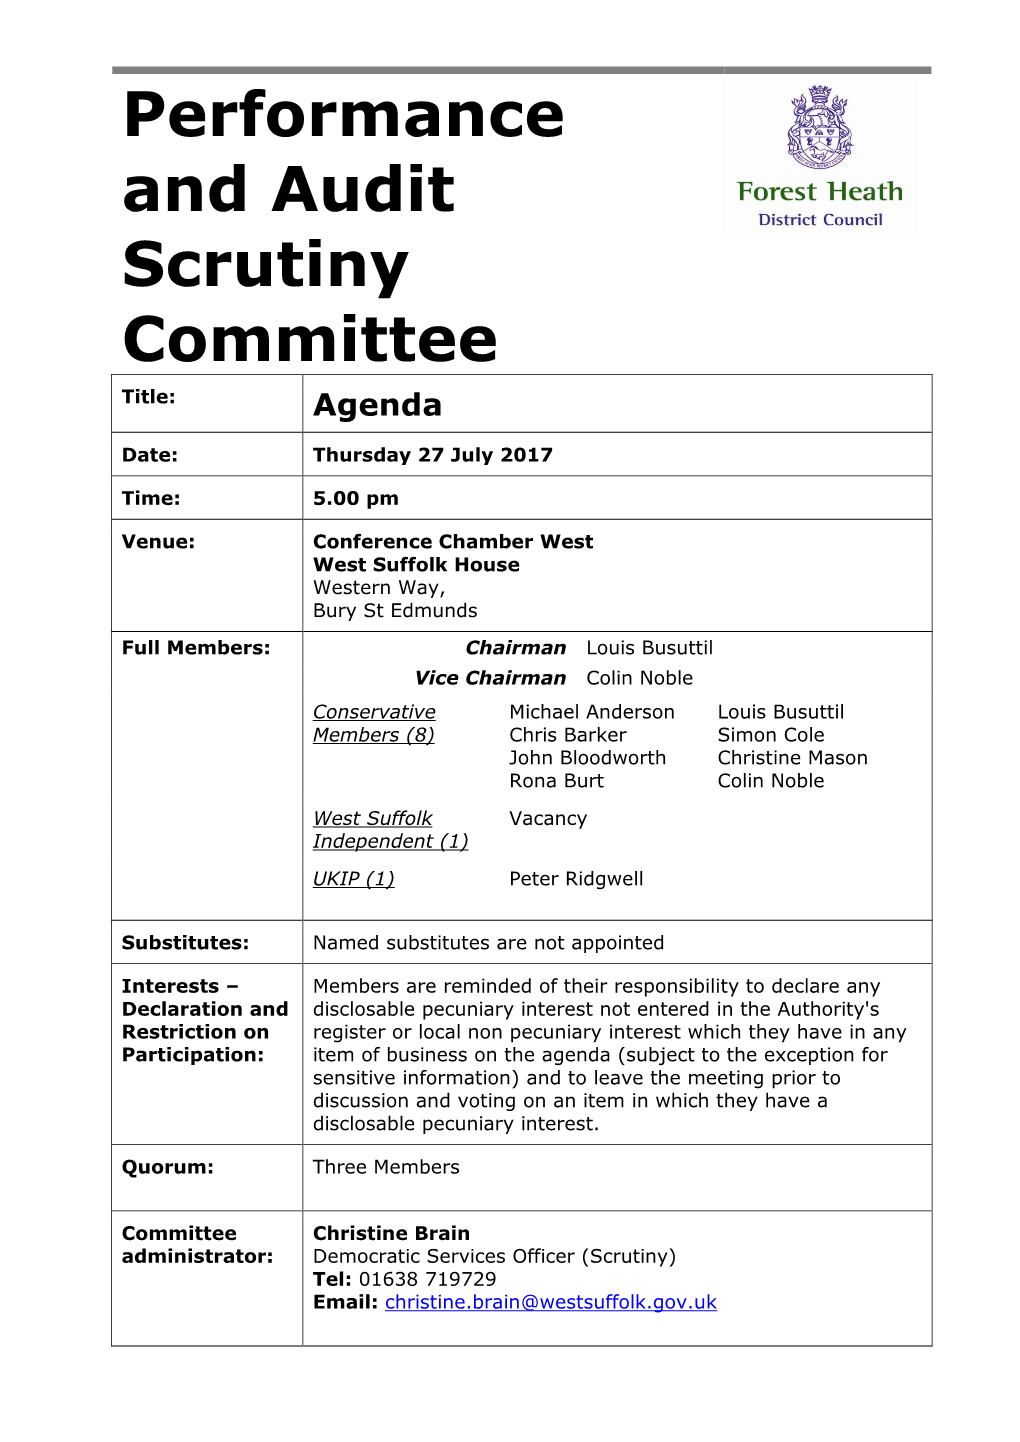 Performance and Audit Scrutiny Committee Title: Agenda